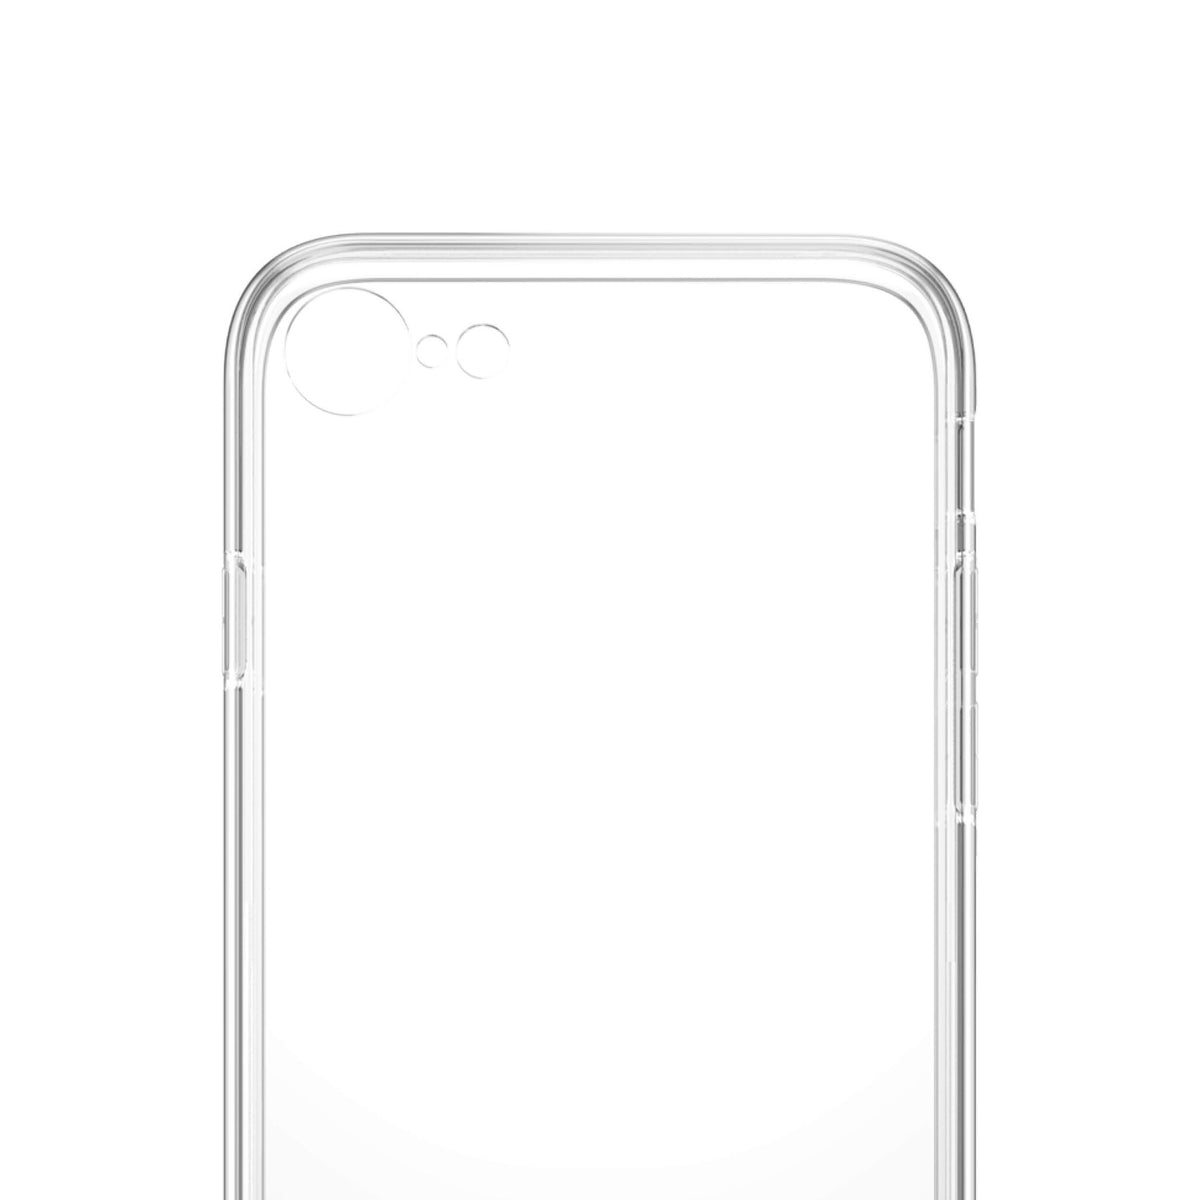 PanzerGlass ® ClearCase for Apple iPhone SE (2020/2022)/ 8 / 7 in Clear